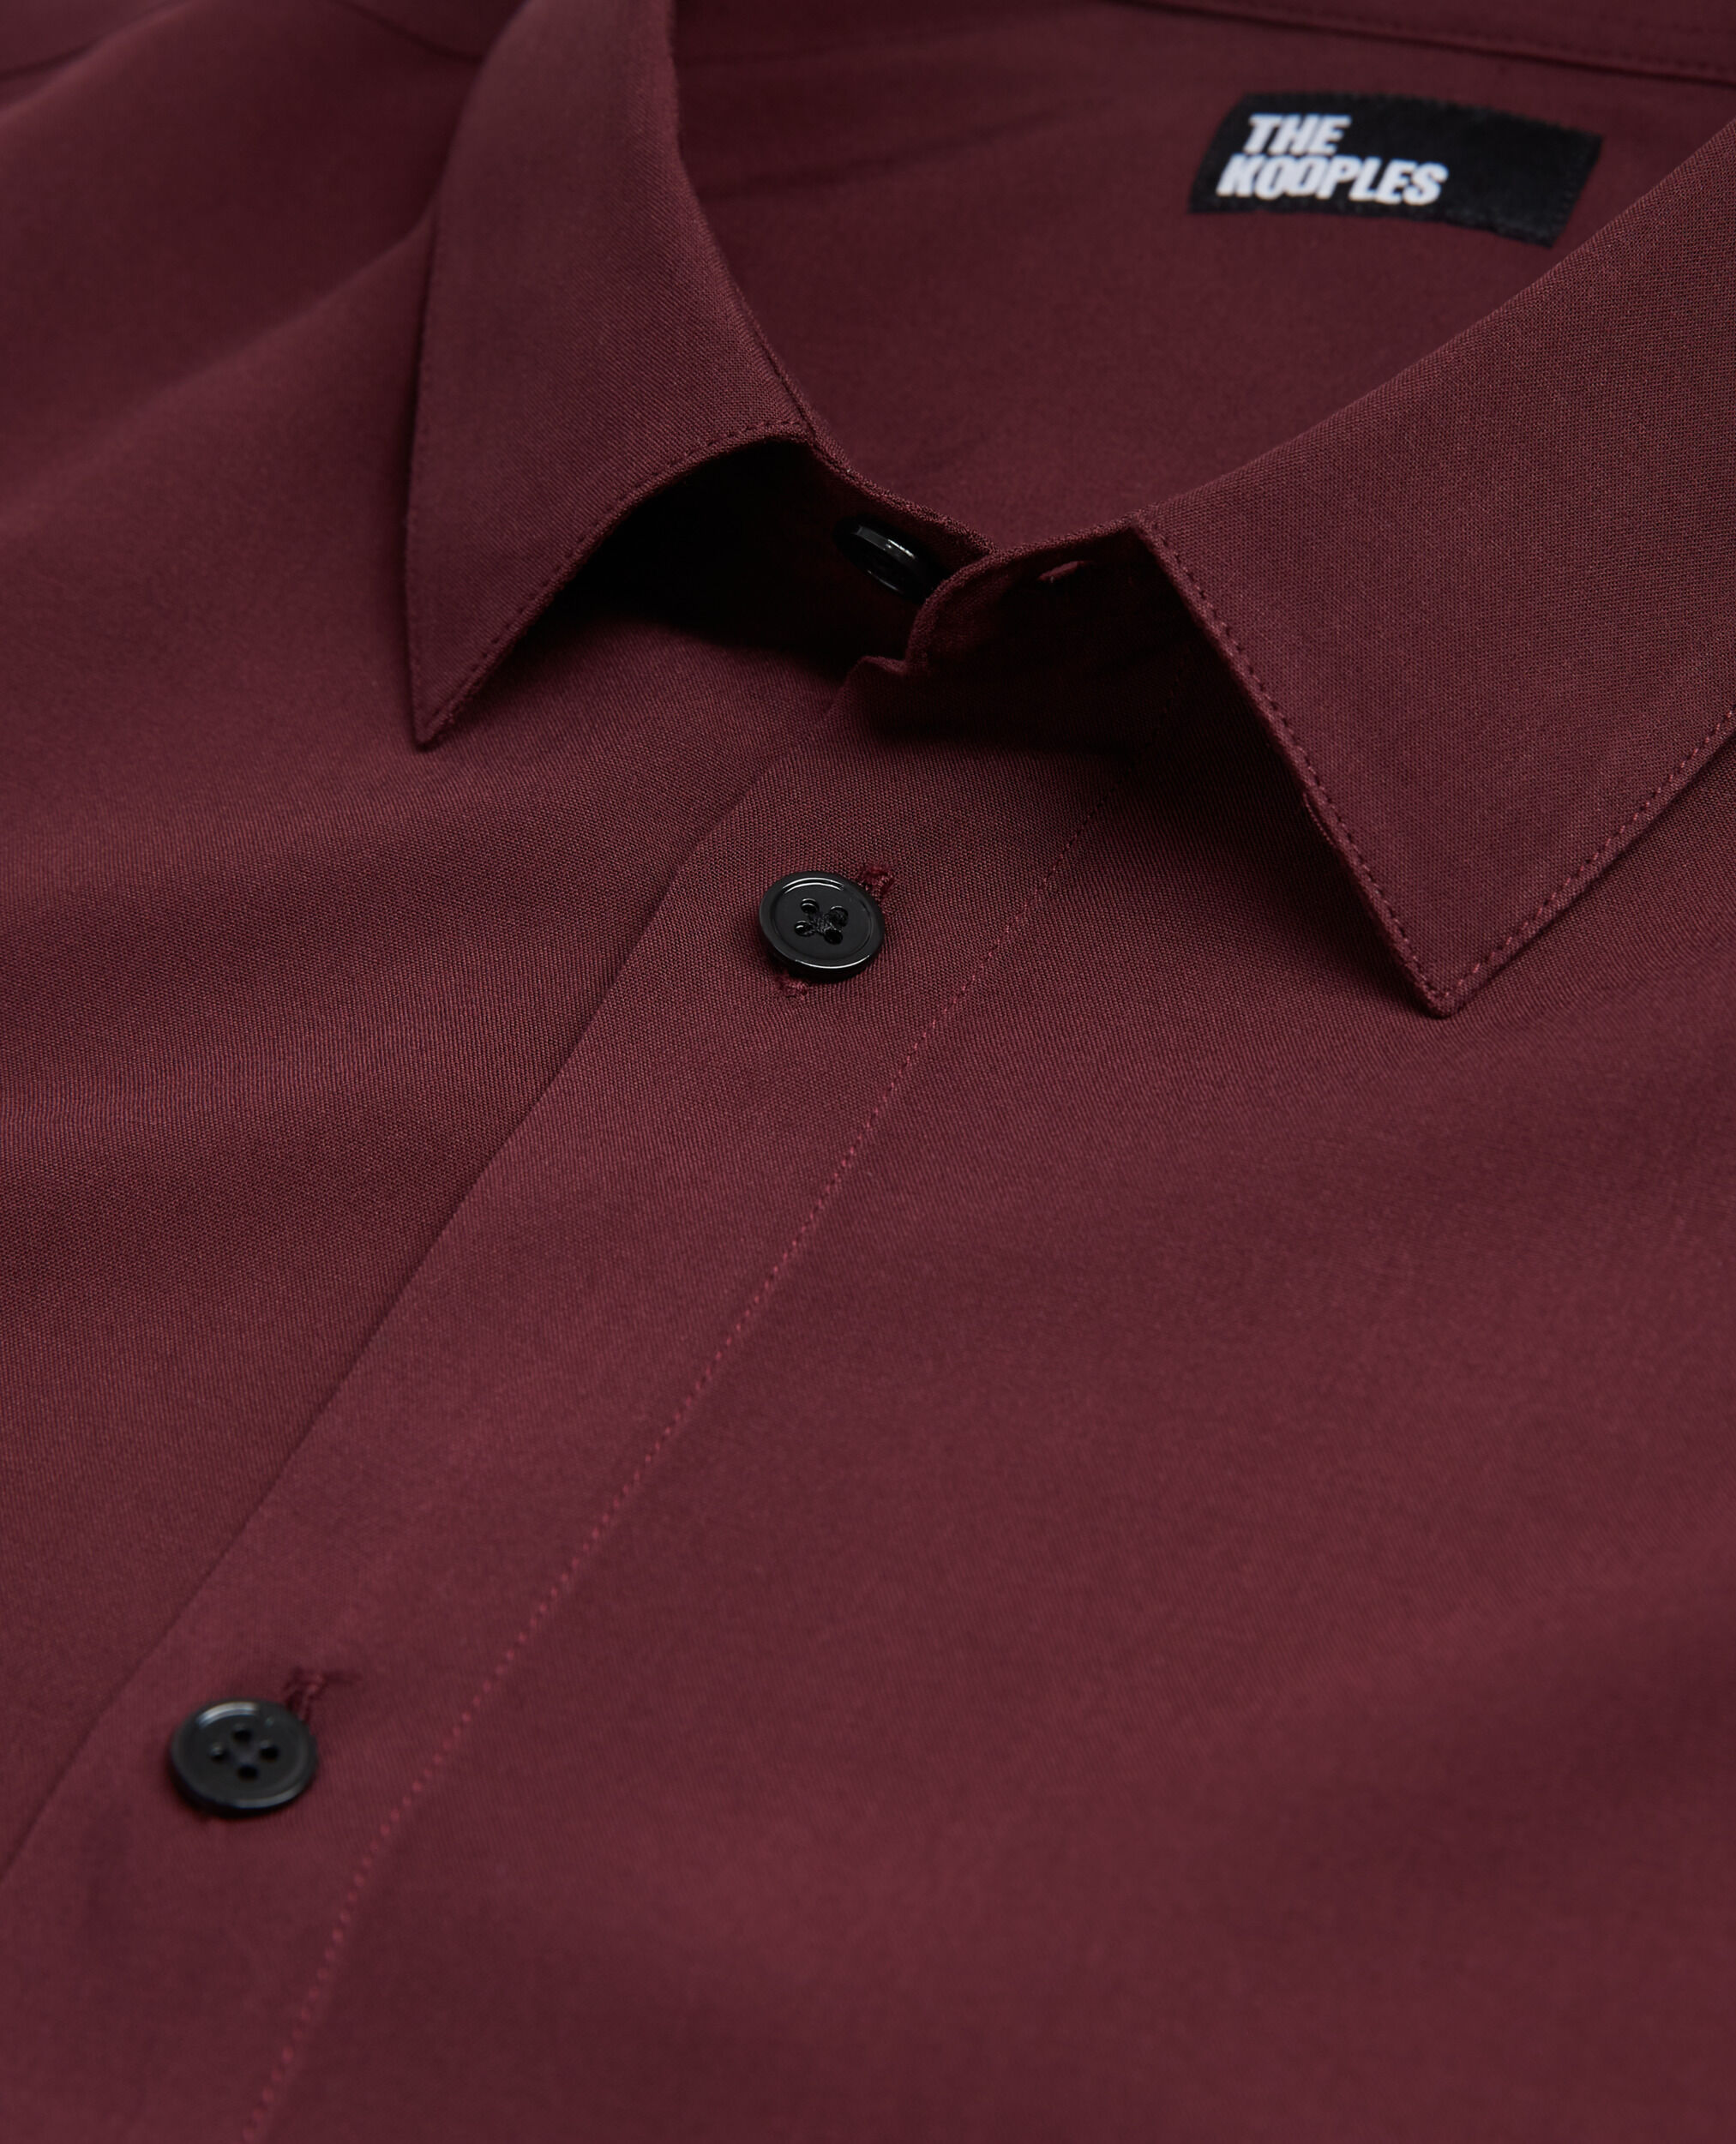 Chemise col classique rouge, BURGUNDY, hi-res image number null